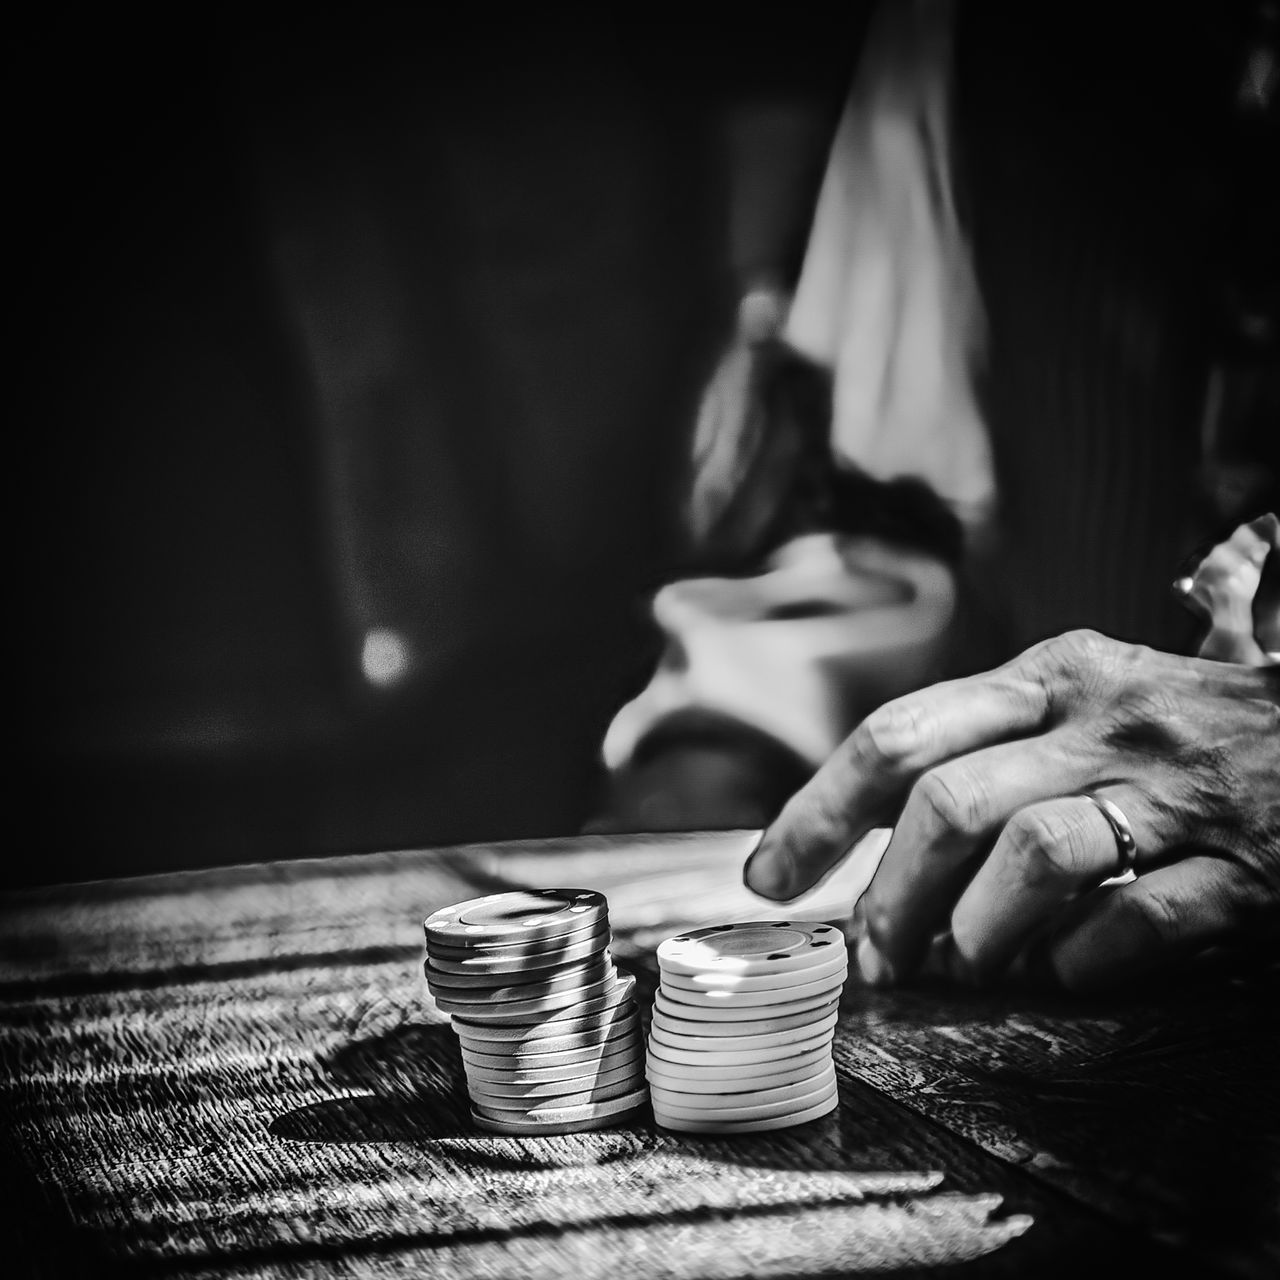 black, darkness, hand, white, adult, one person, table, indoors, food and drink, black and white, monochrome photography, monochrome, social issues, focus on foreground, men, person, holding, drink, finance, women, lifestyles